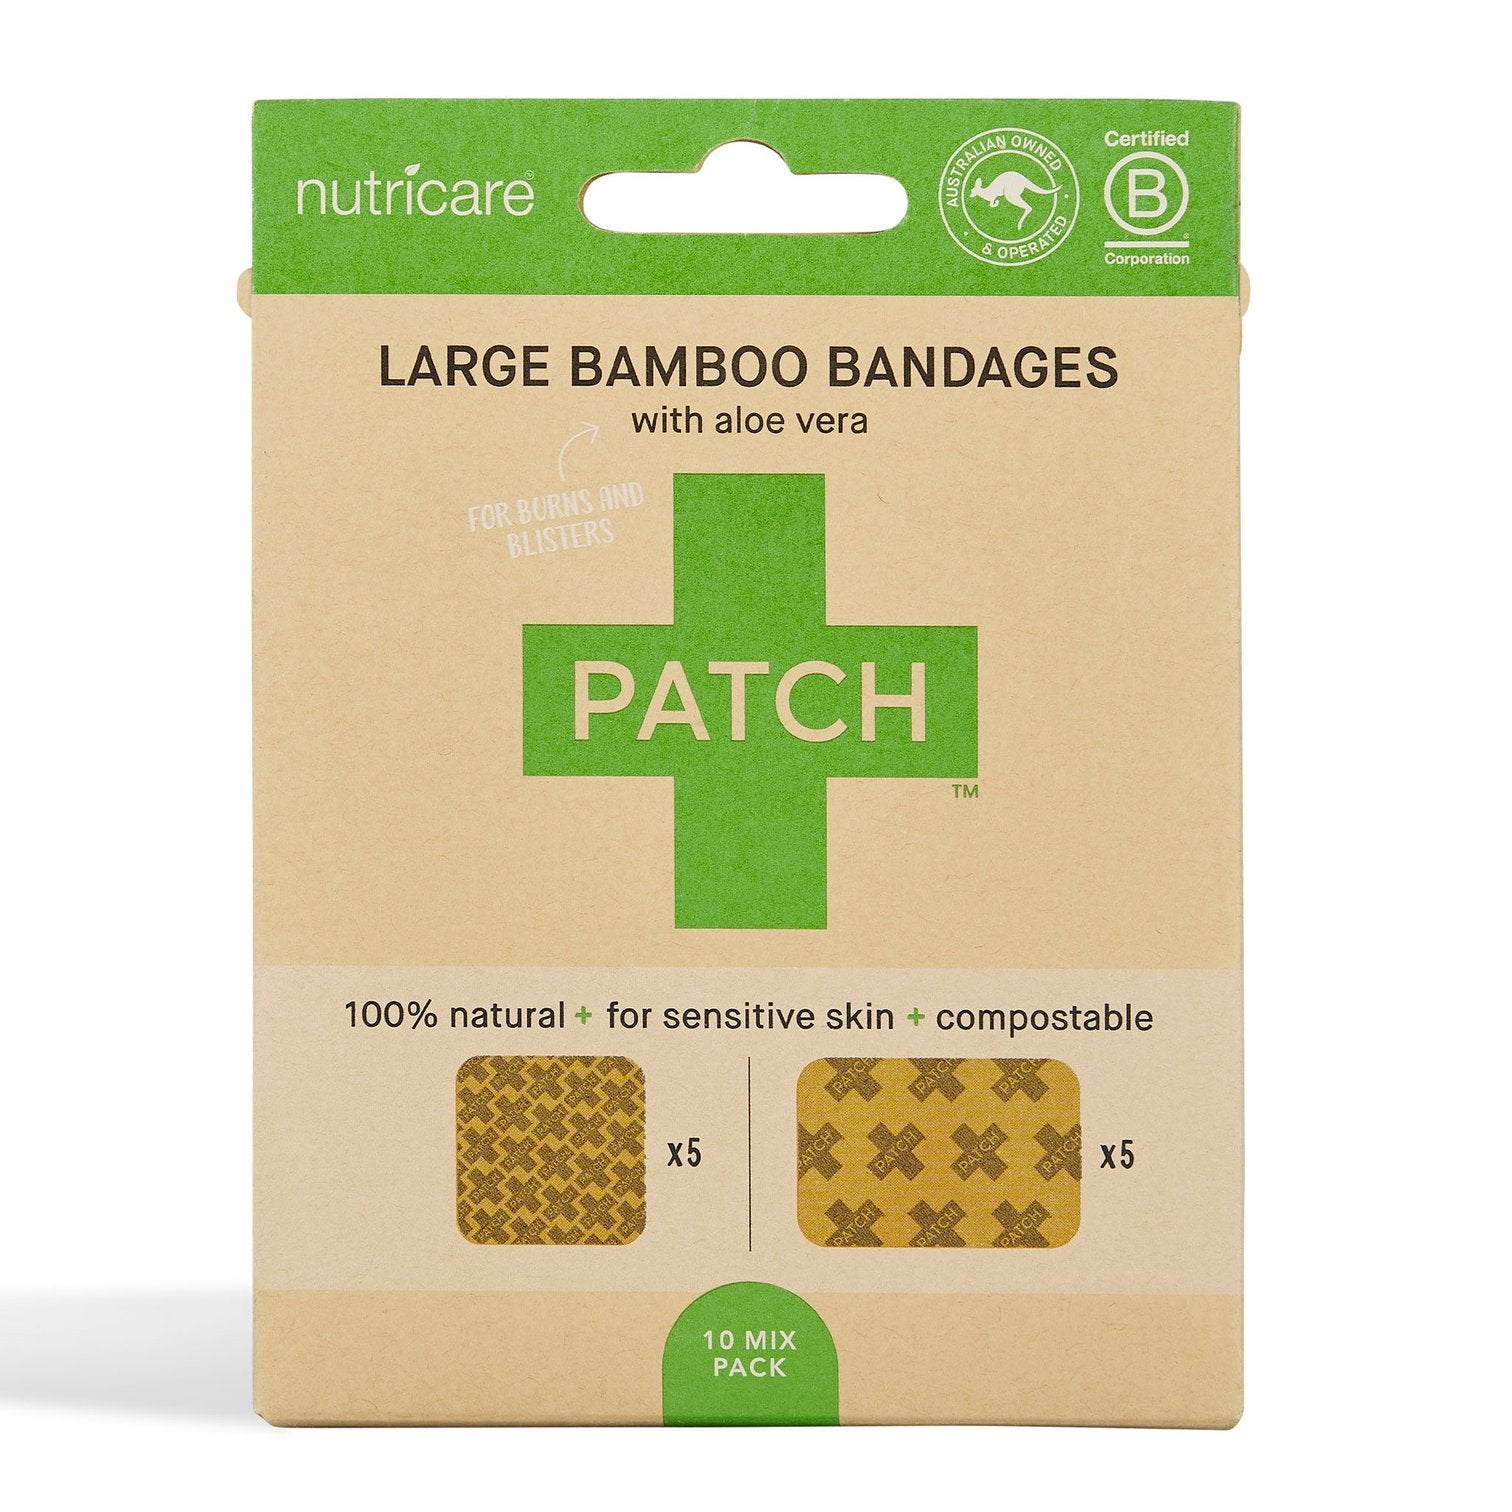 Patch | Aloe Vera Bamboo Bandages - Large Square and Rectangles - 10 pack